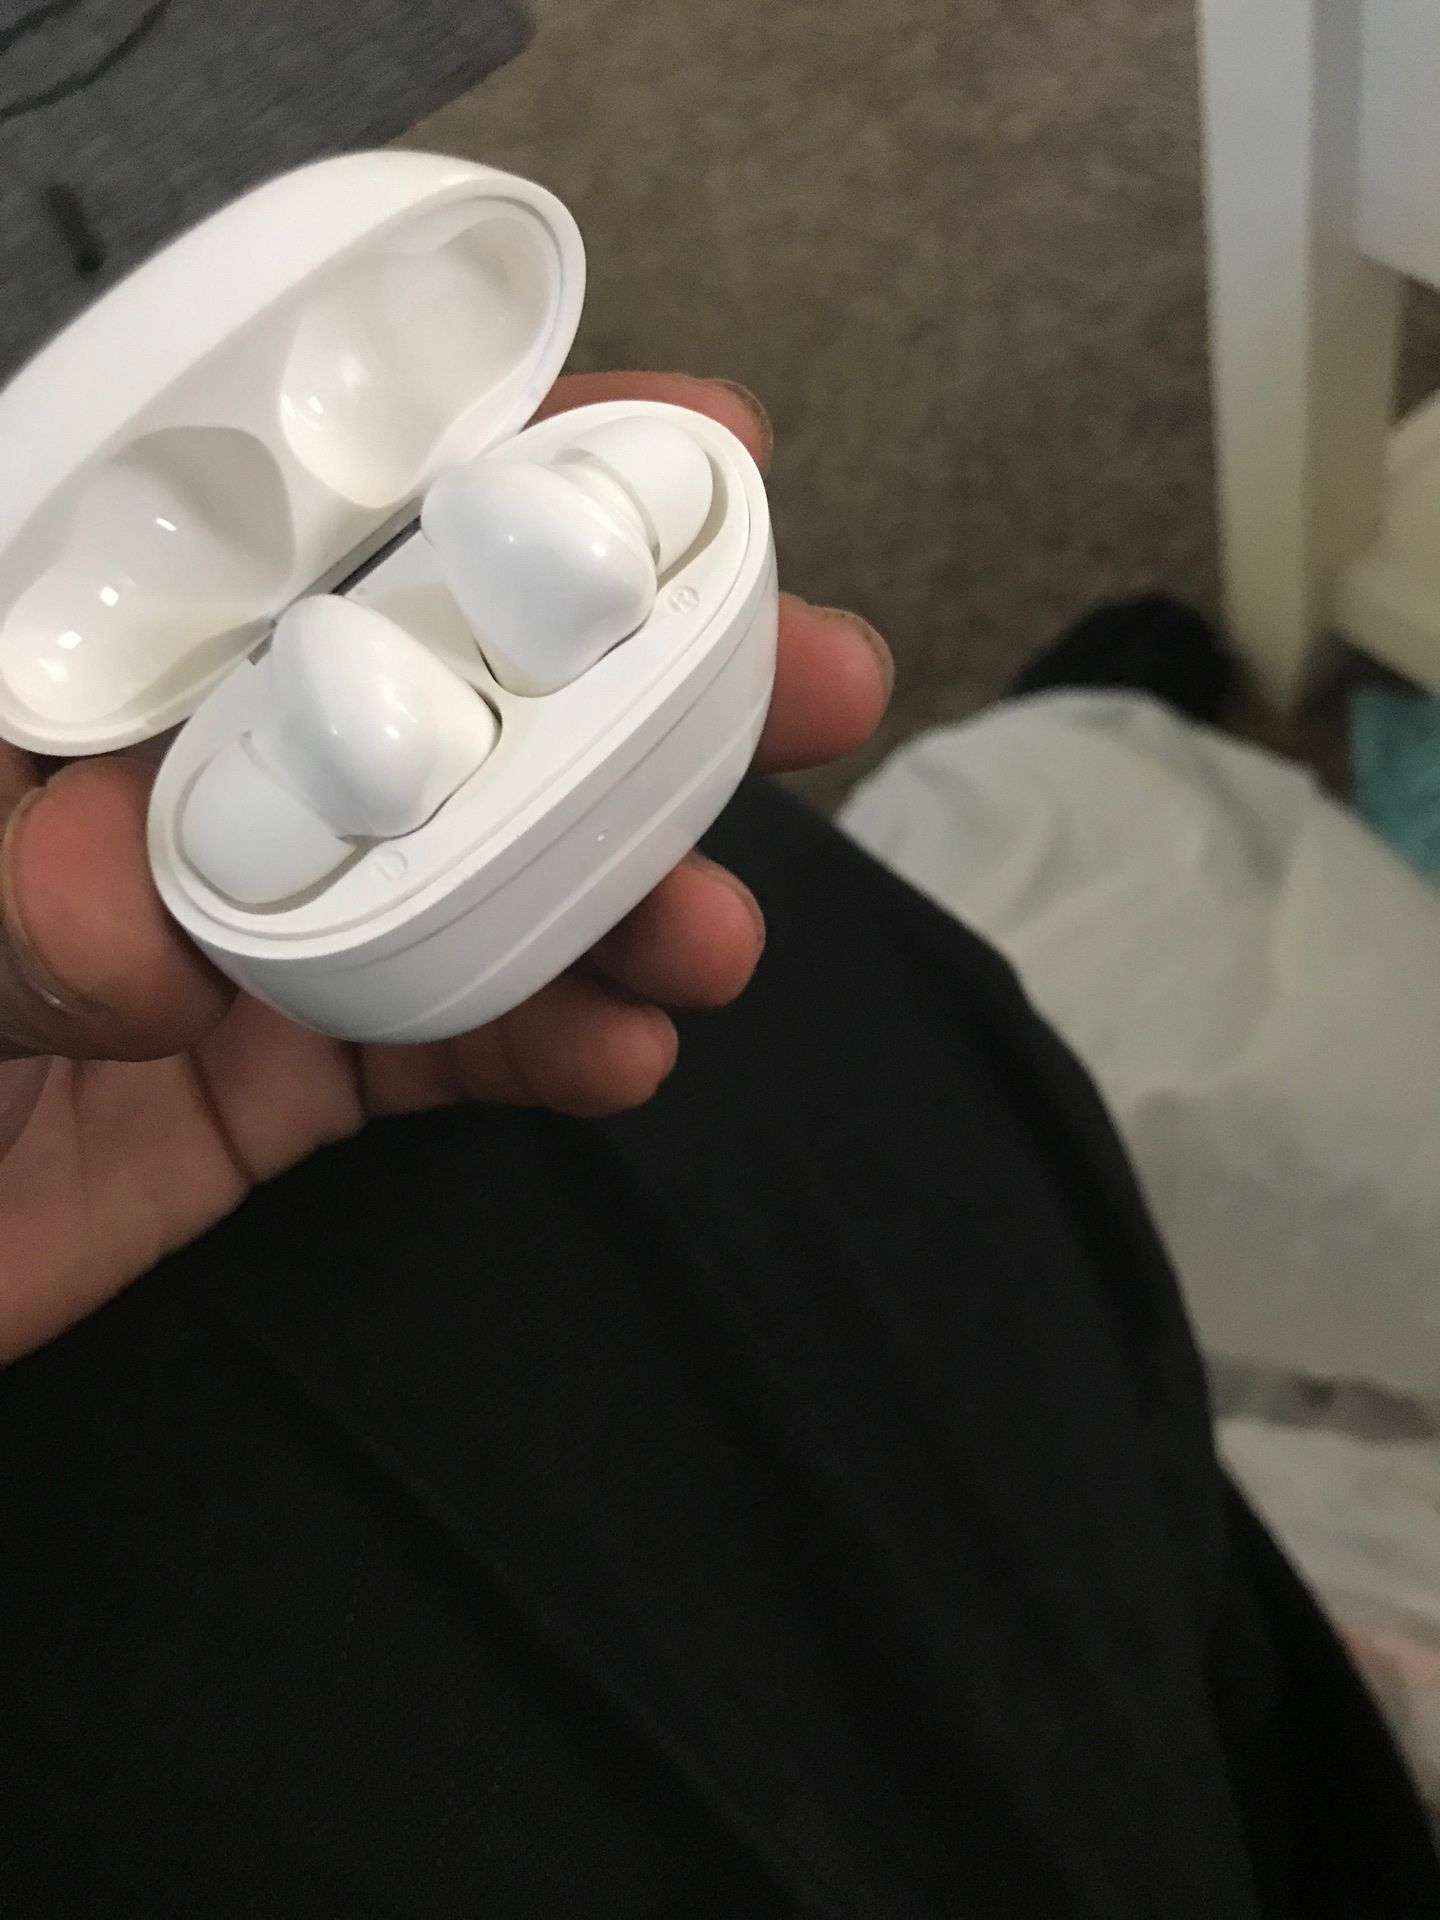 Wireless headphones with charger